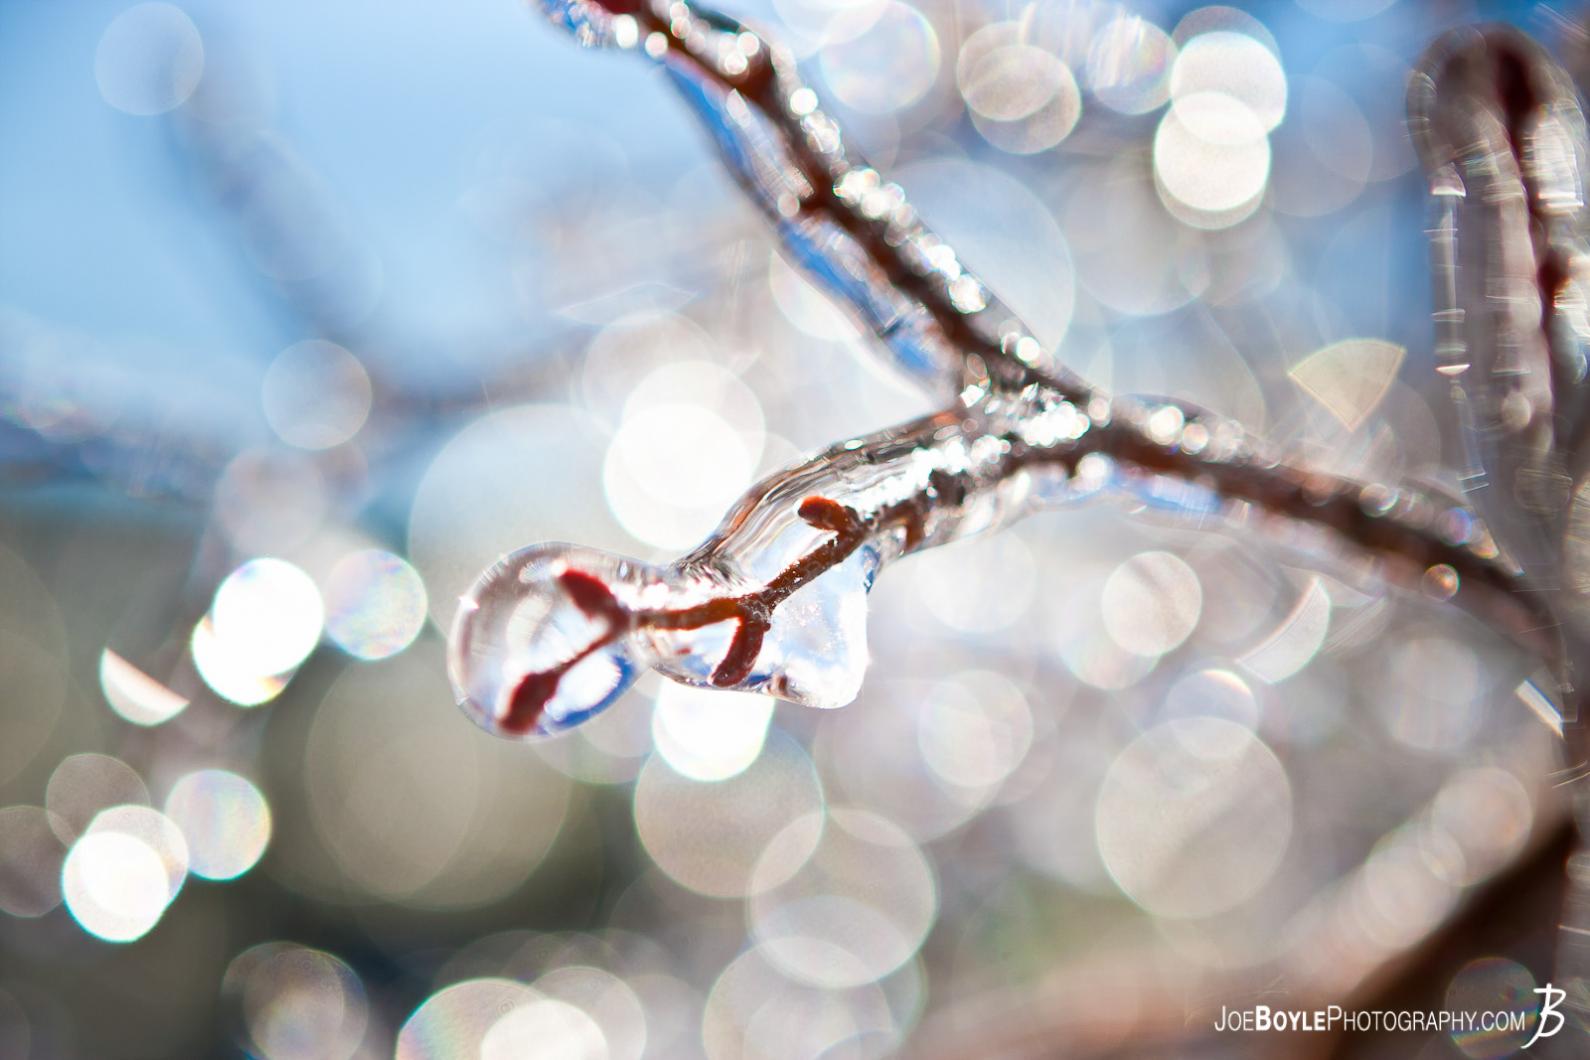 I captured this photo of a tree branch covered in ice after an ice storm came through the Cleveland area.